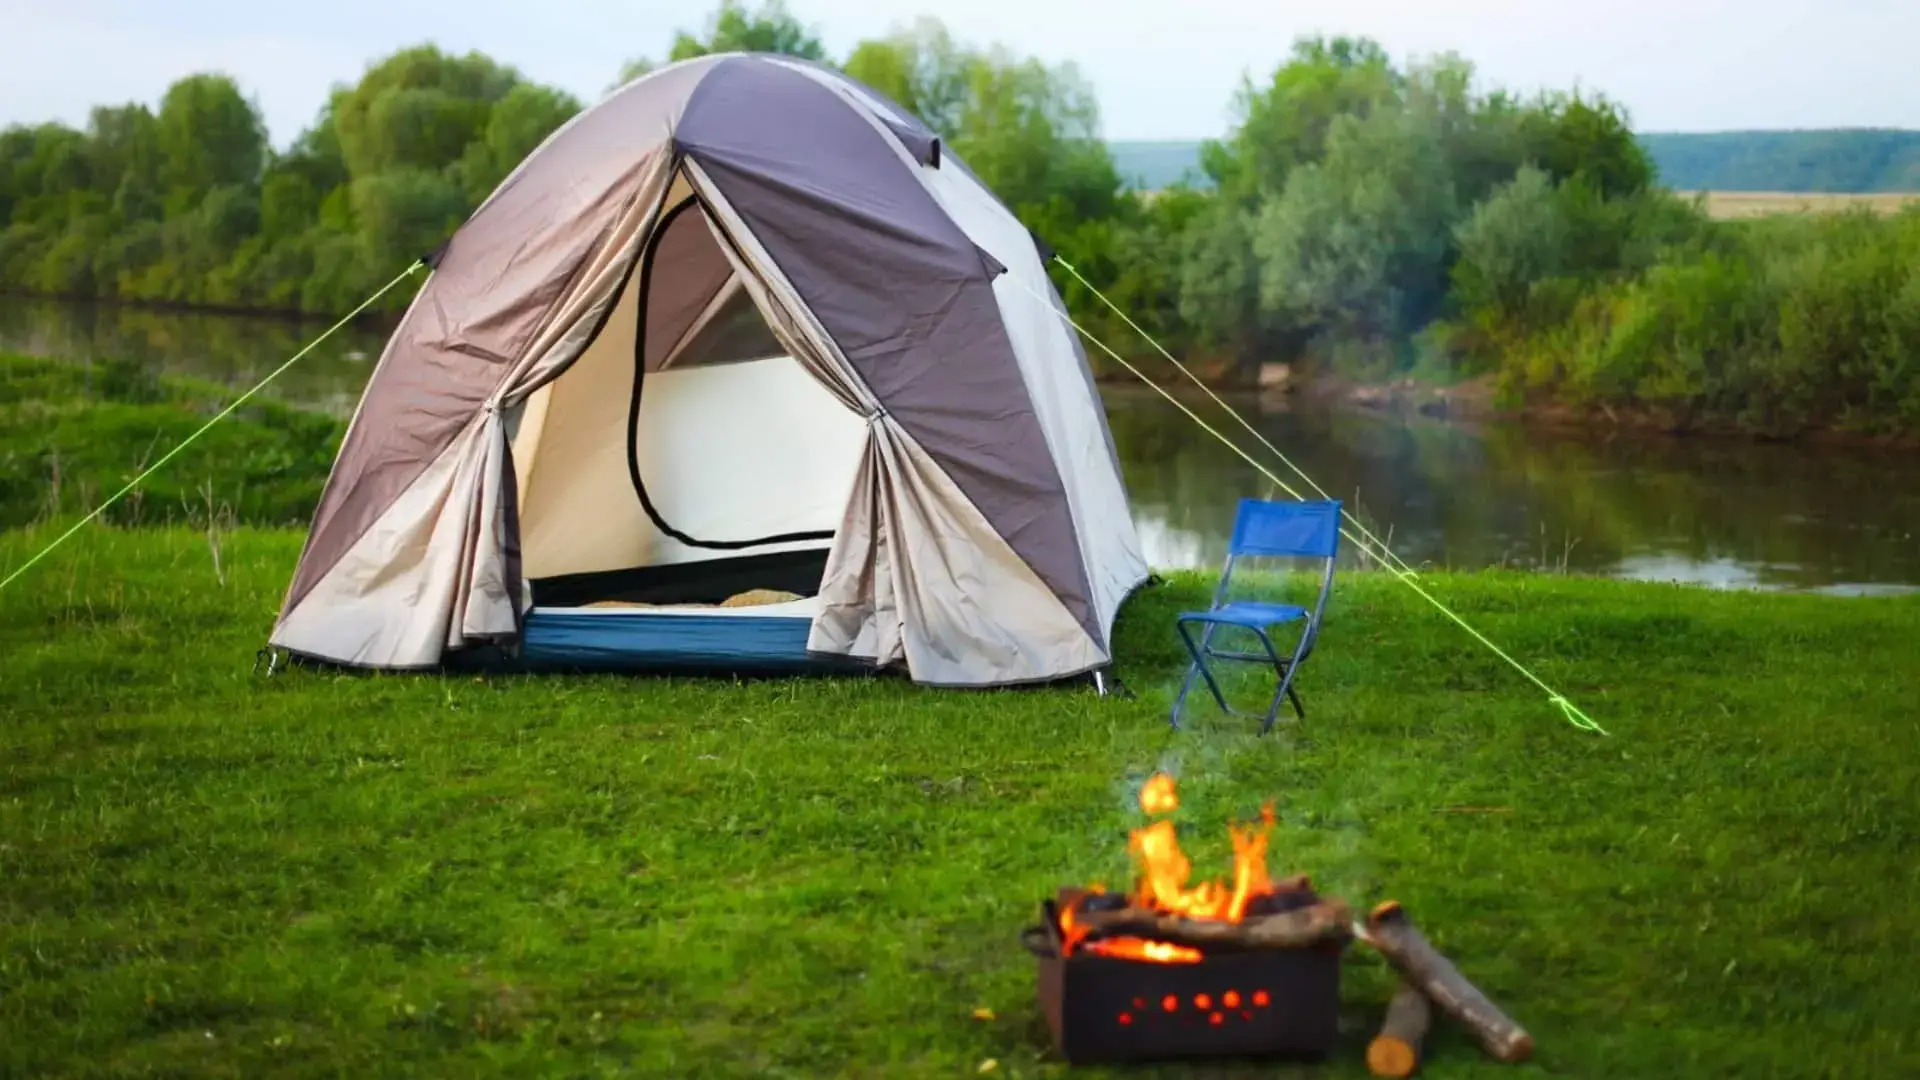 What is hot tent camping?